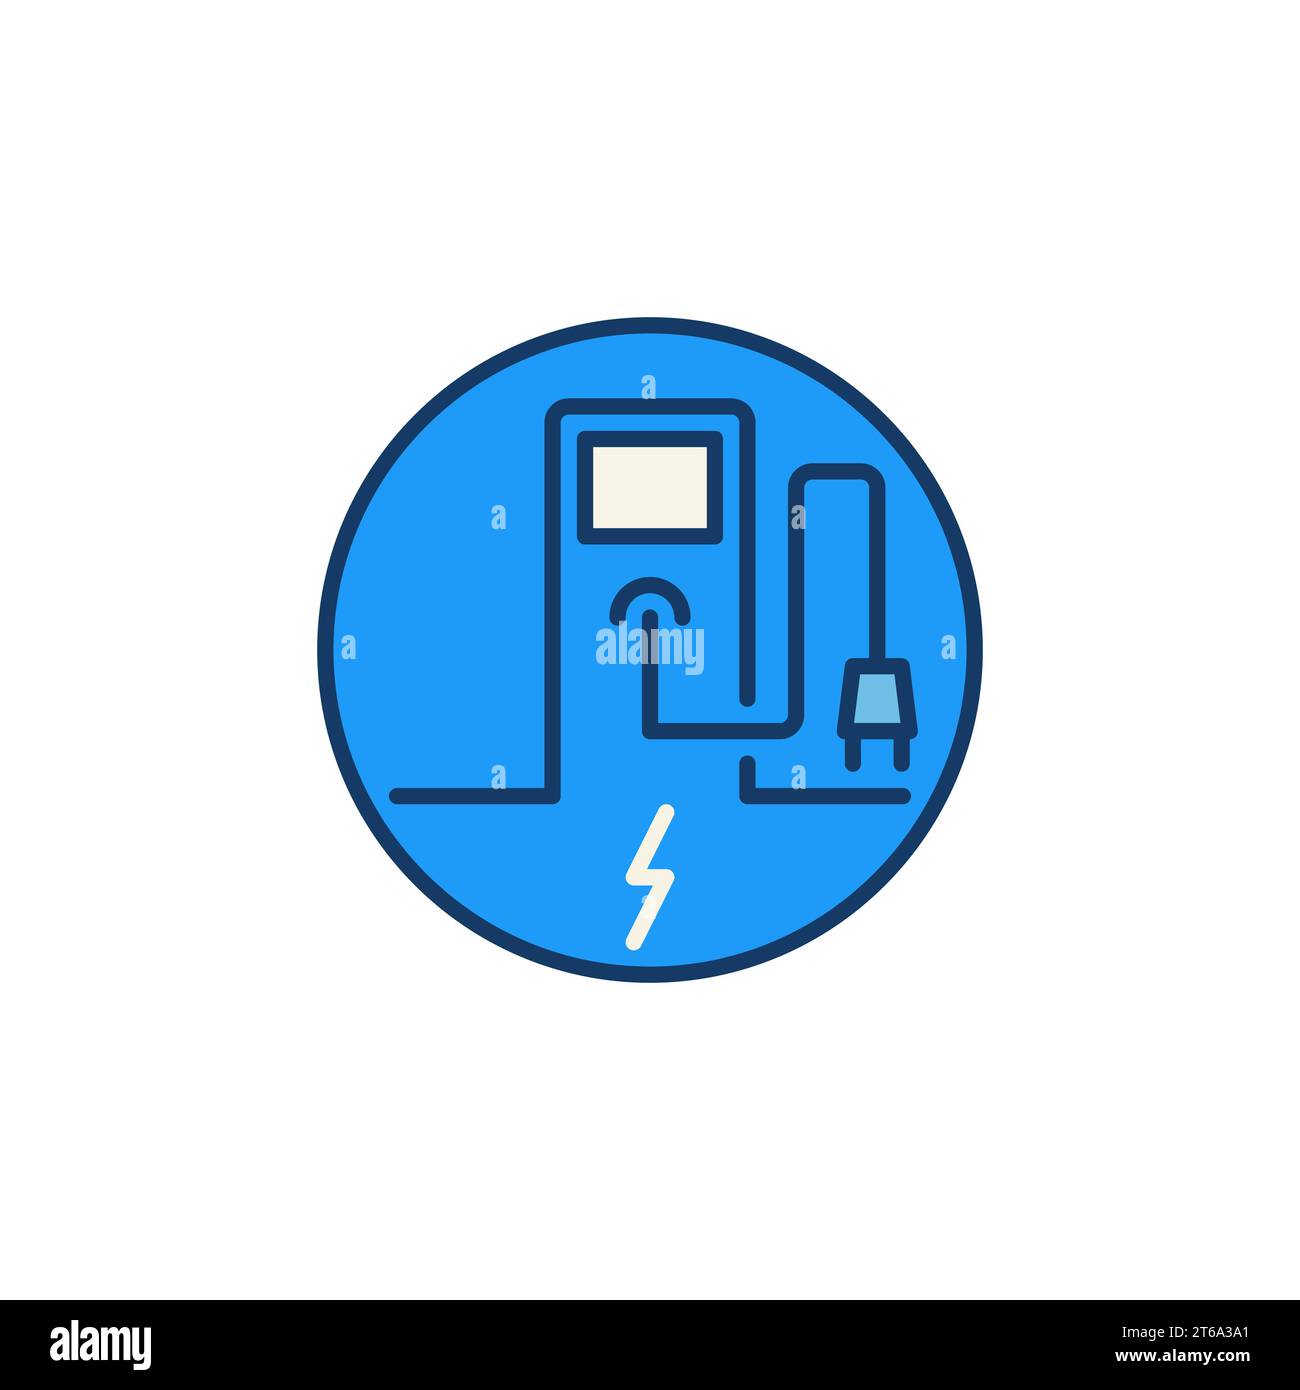 Electric Car Recharging Point vector concept round colored icon or symbol Stock Vector